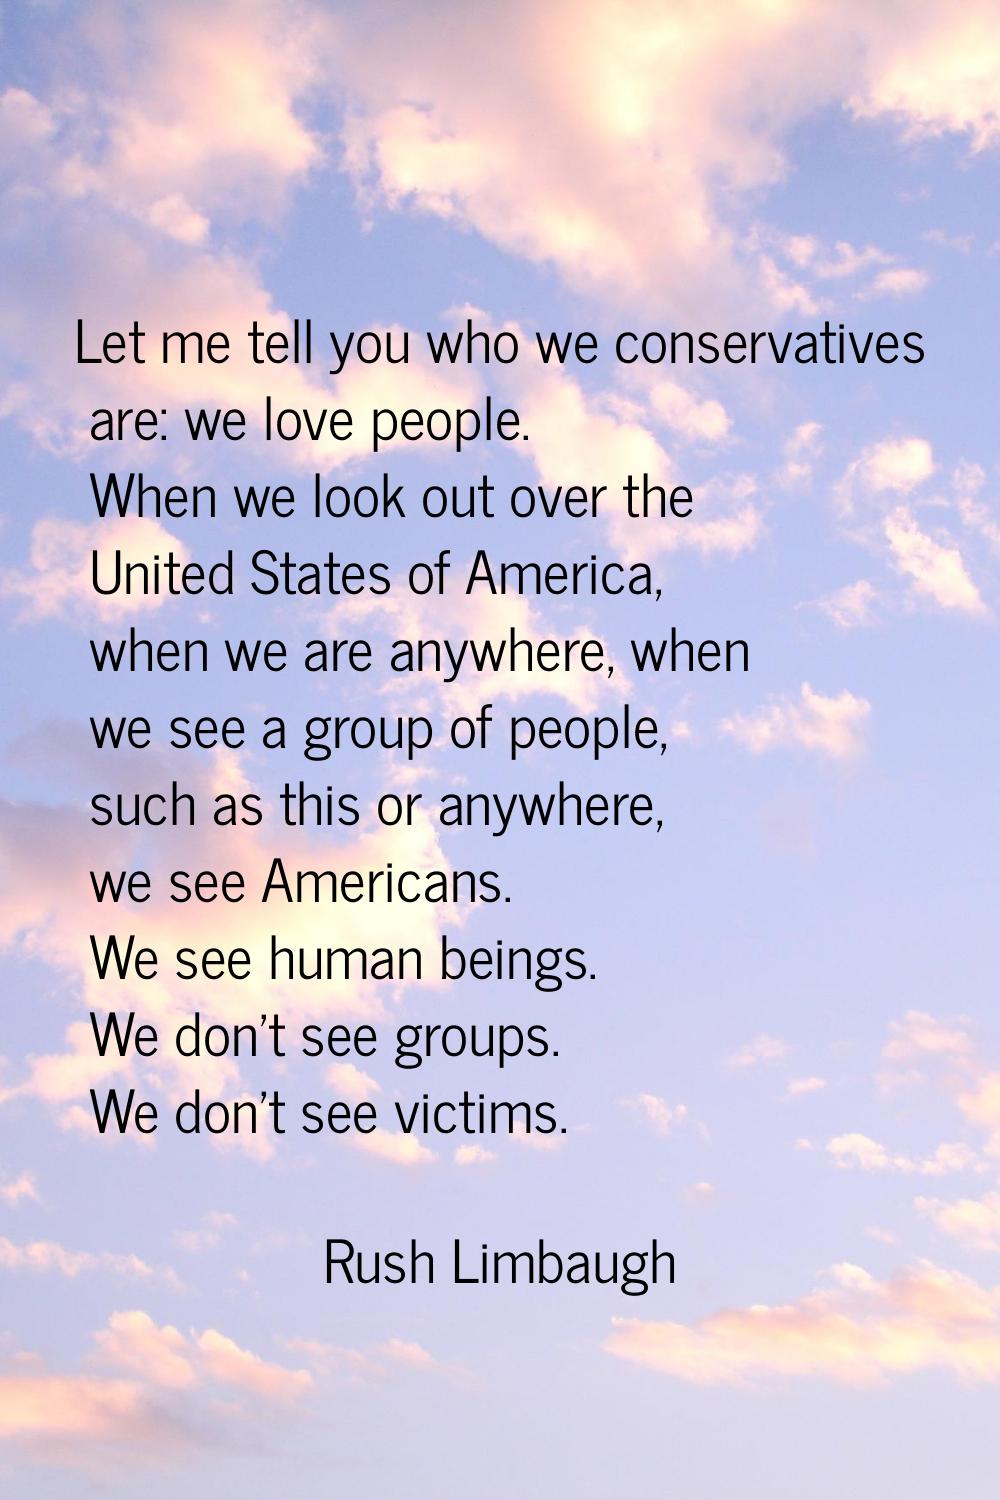 Let me tell you who we conservatives are: we love people. When we look out over the United States o